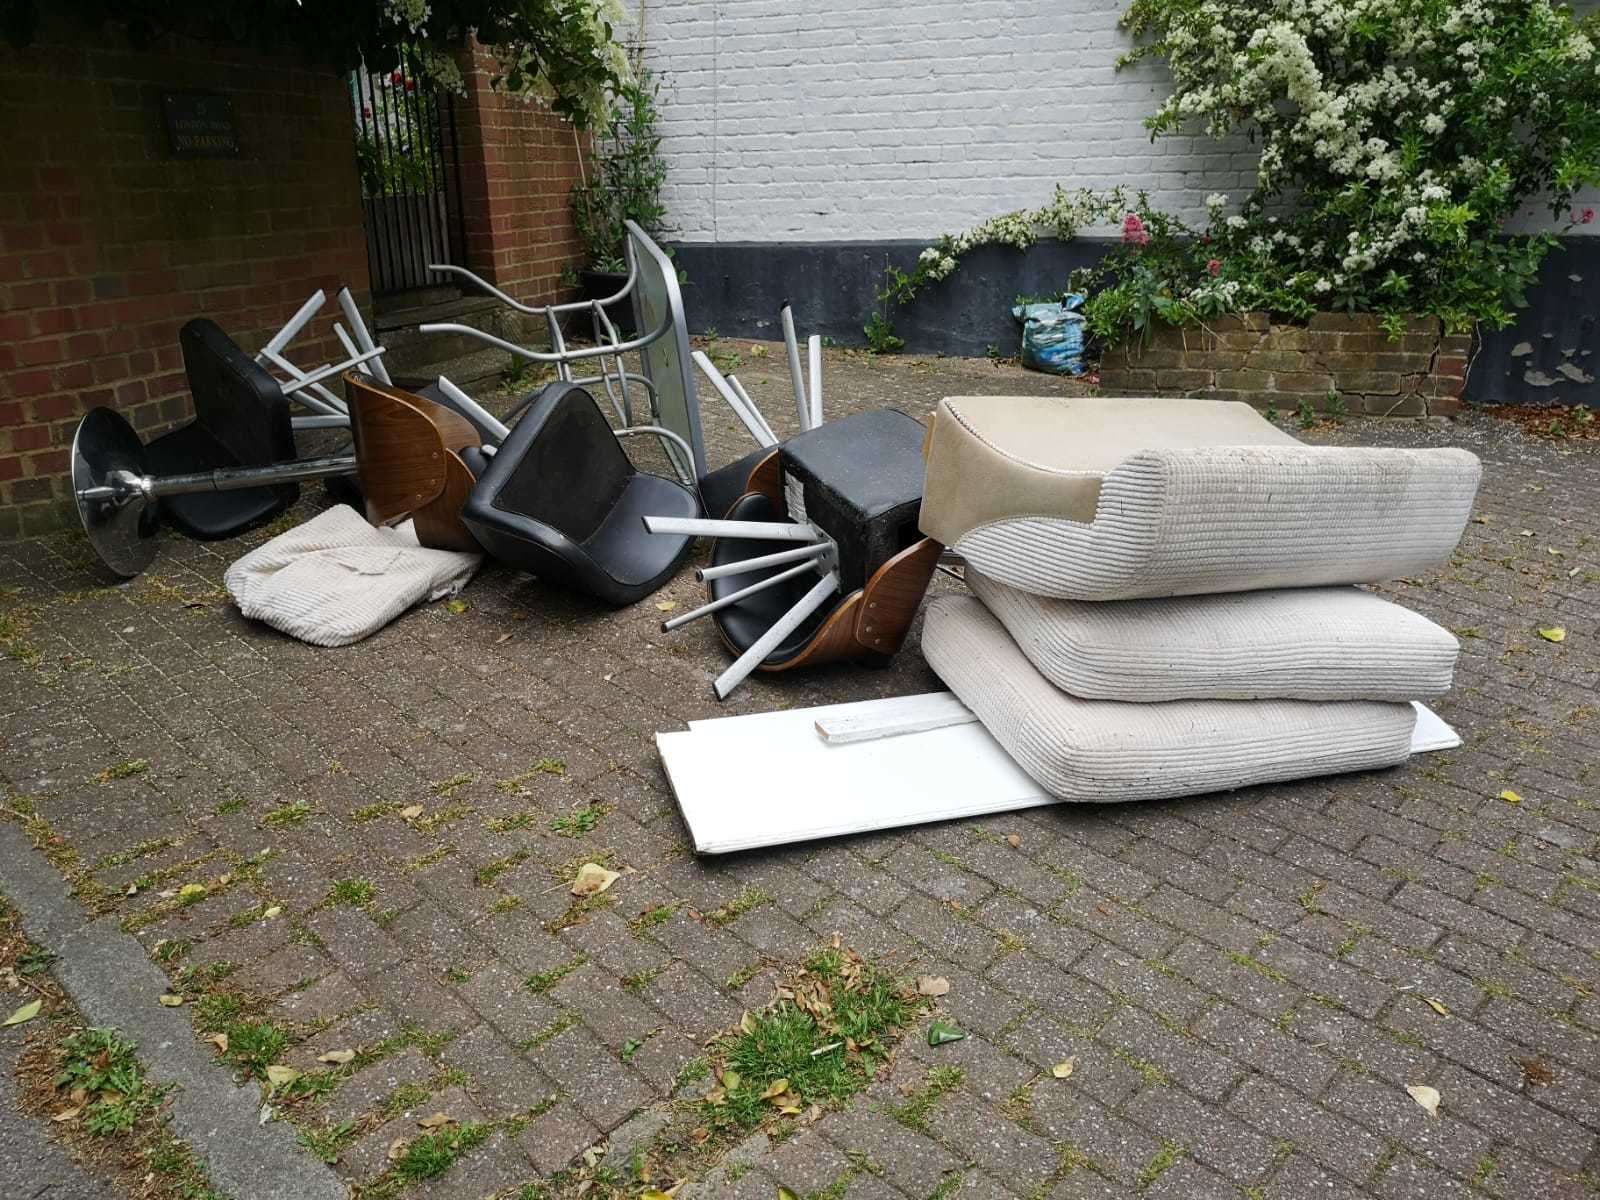 Rubbish flytipped by Mr Paul Earwaker on a private driveway in Maidstone